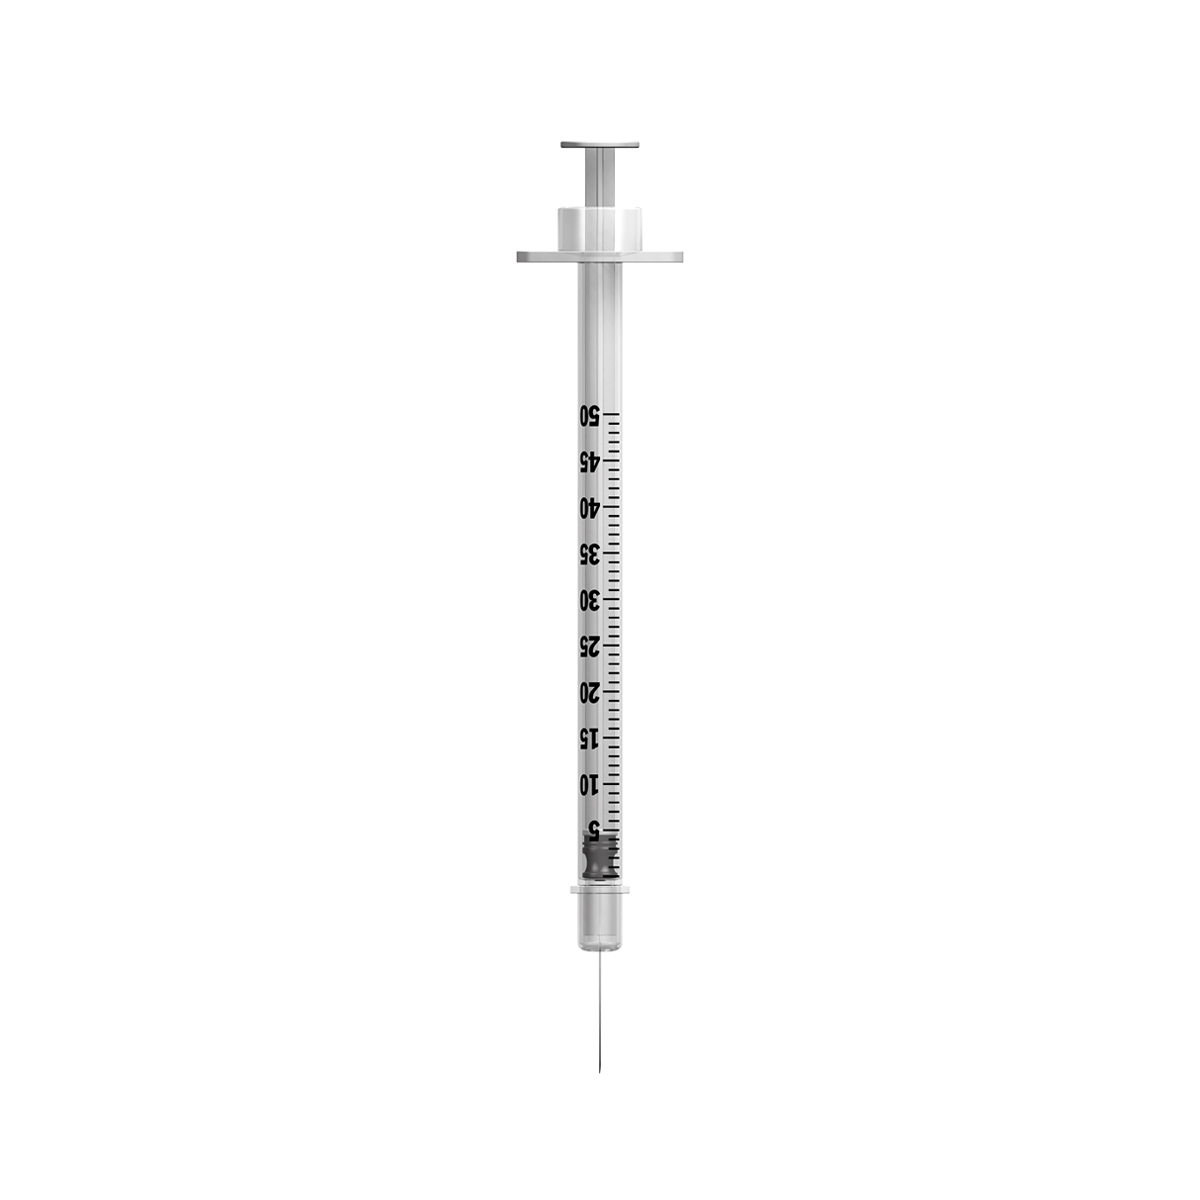 0.5ml 29G 12mm needle BD Micro-fine Syringe (boxed in 200) 